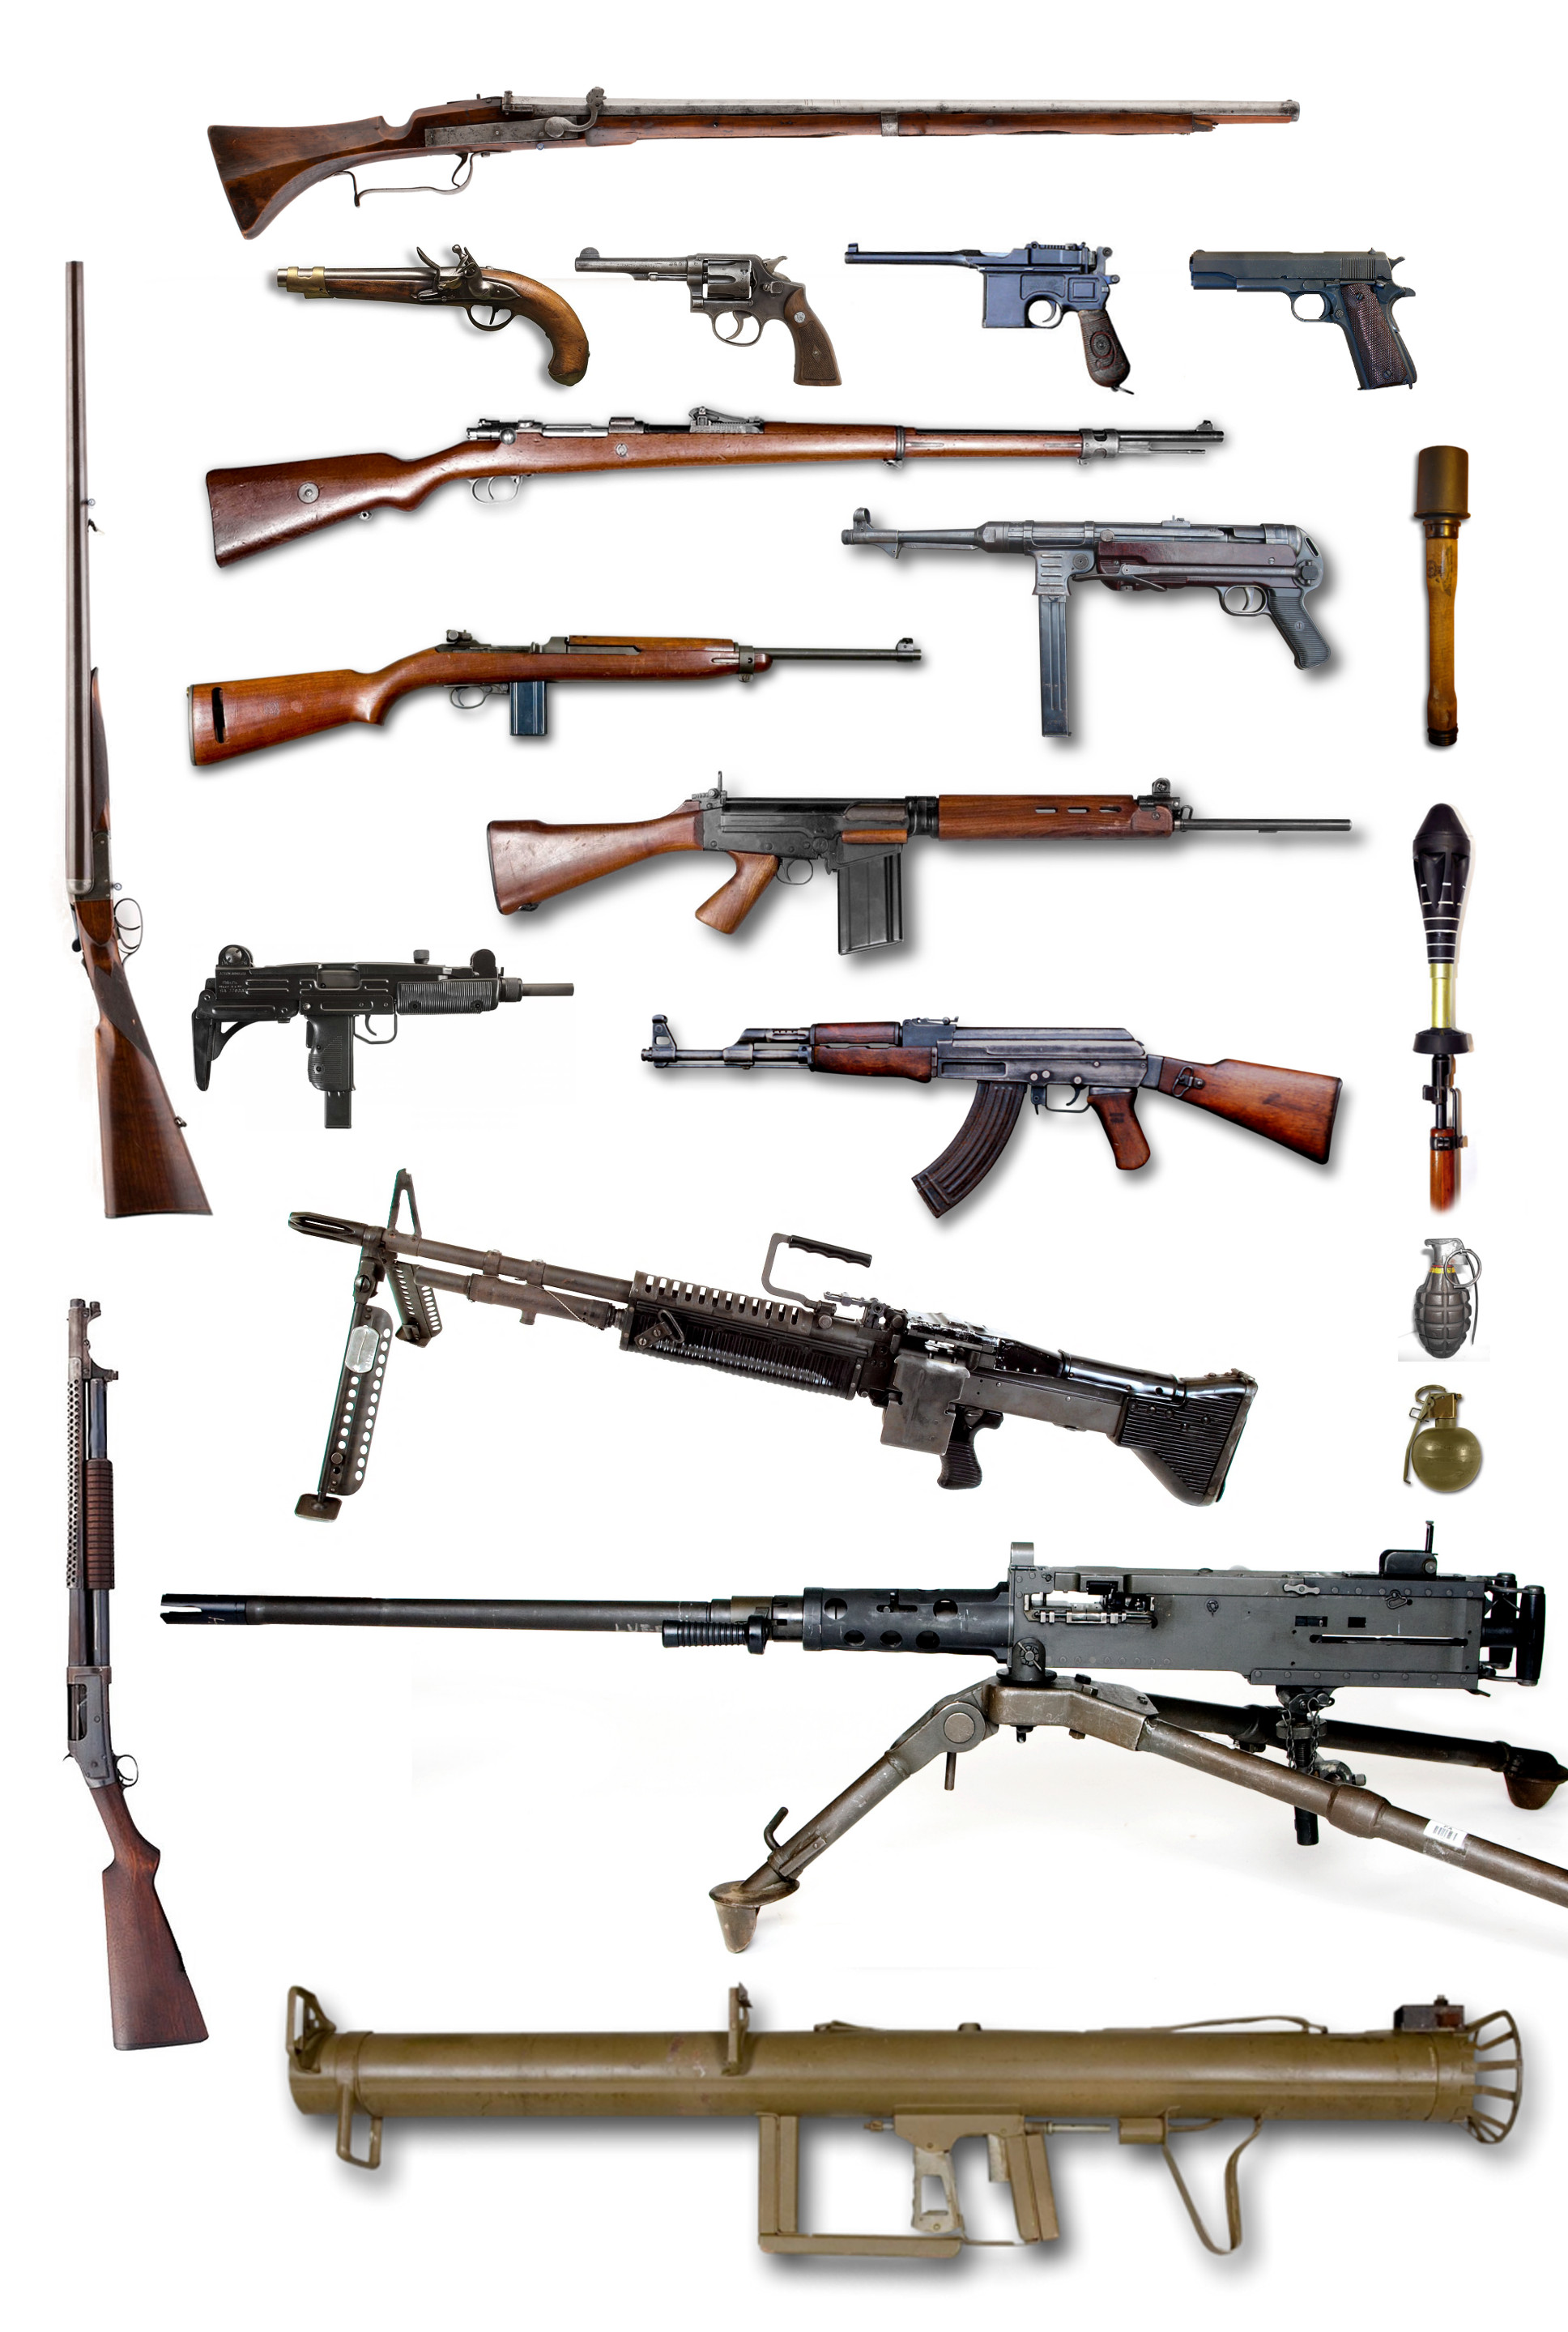 https://upload.wikimedia.org/wikipedia/commons/3/3d/Small_arms_compilation.jpg